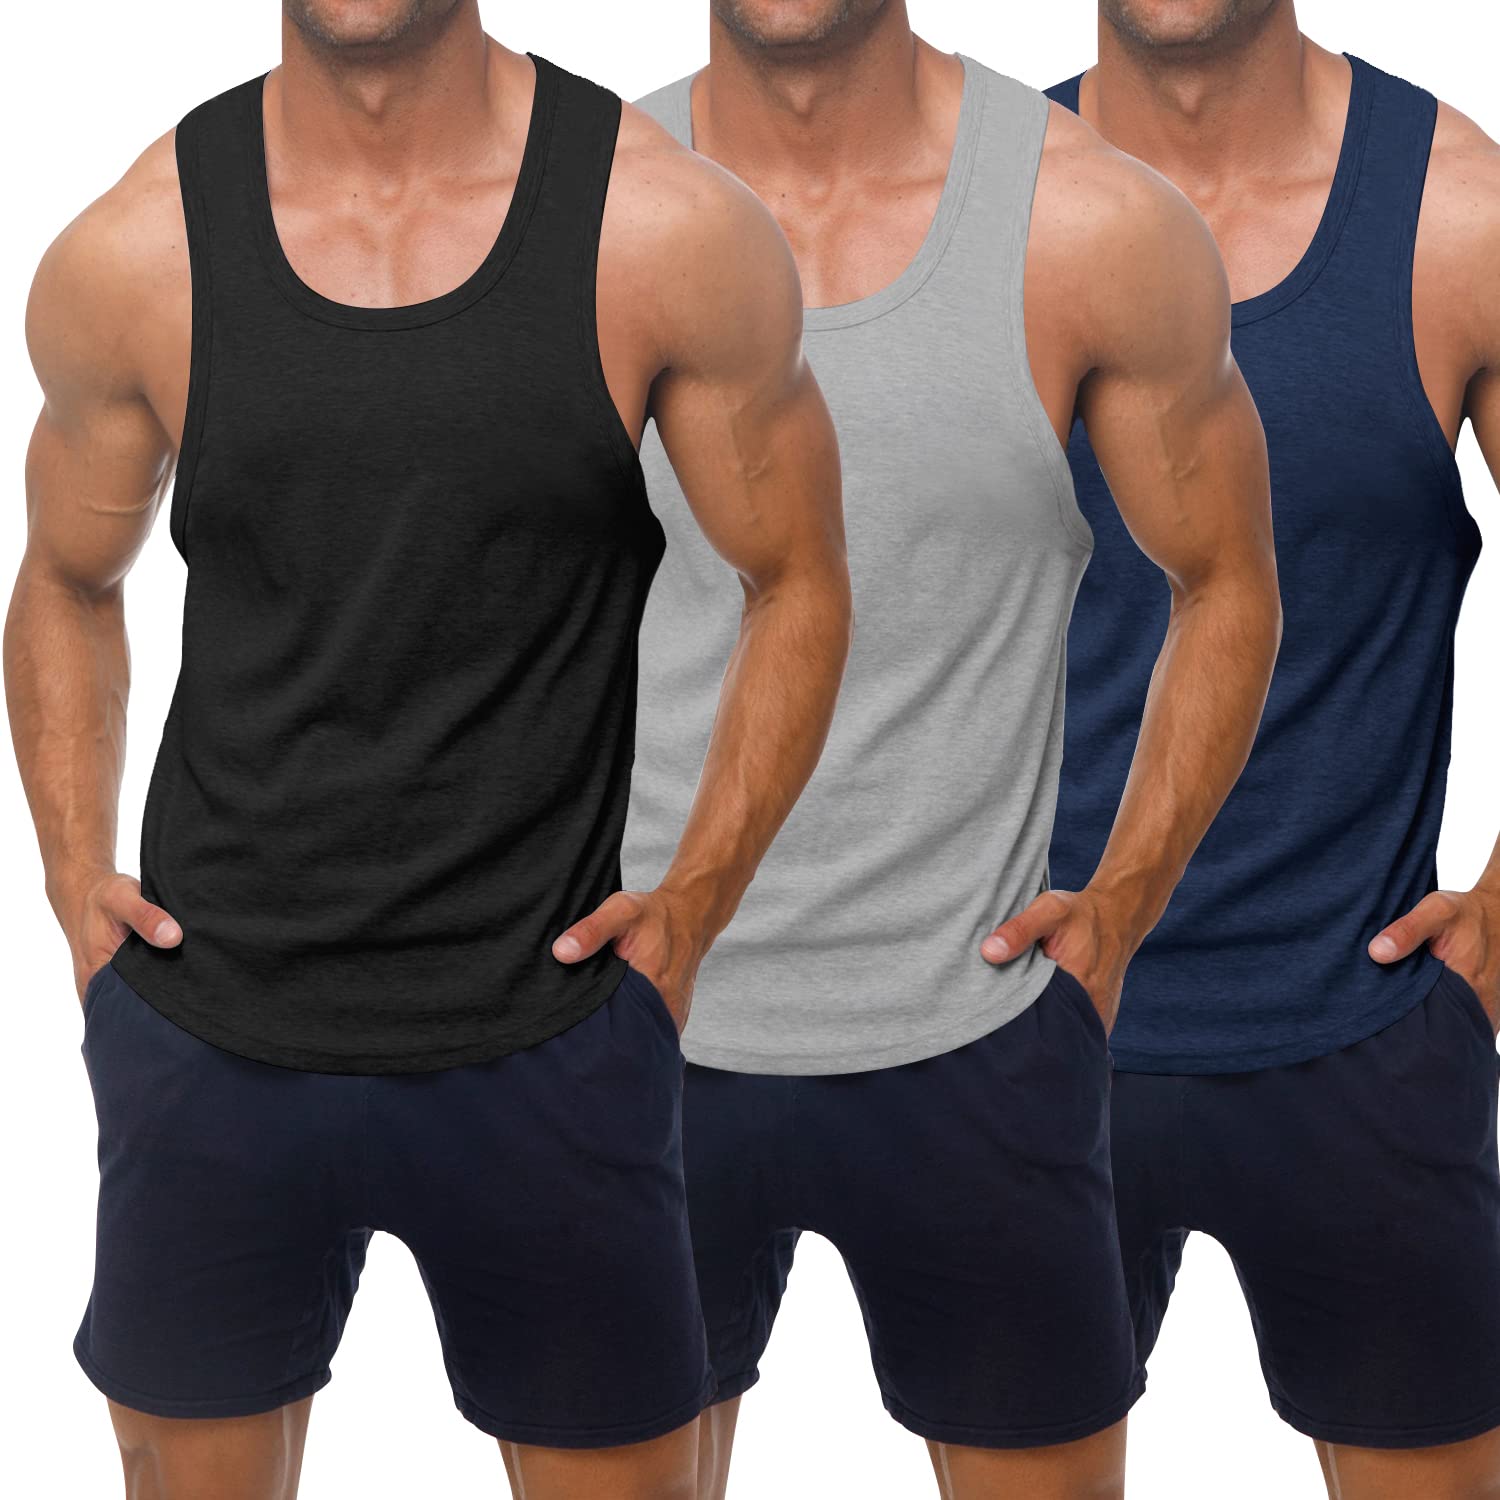 KAWATA Mens Workout Tank Top Quick Dry gym Muscle Tees Fitness Bodybuilding Sleeveless T Shirts